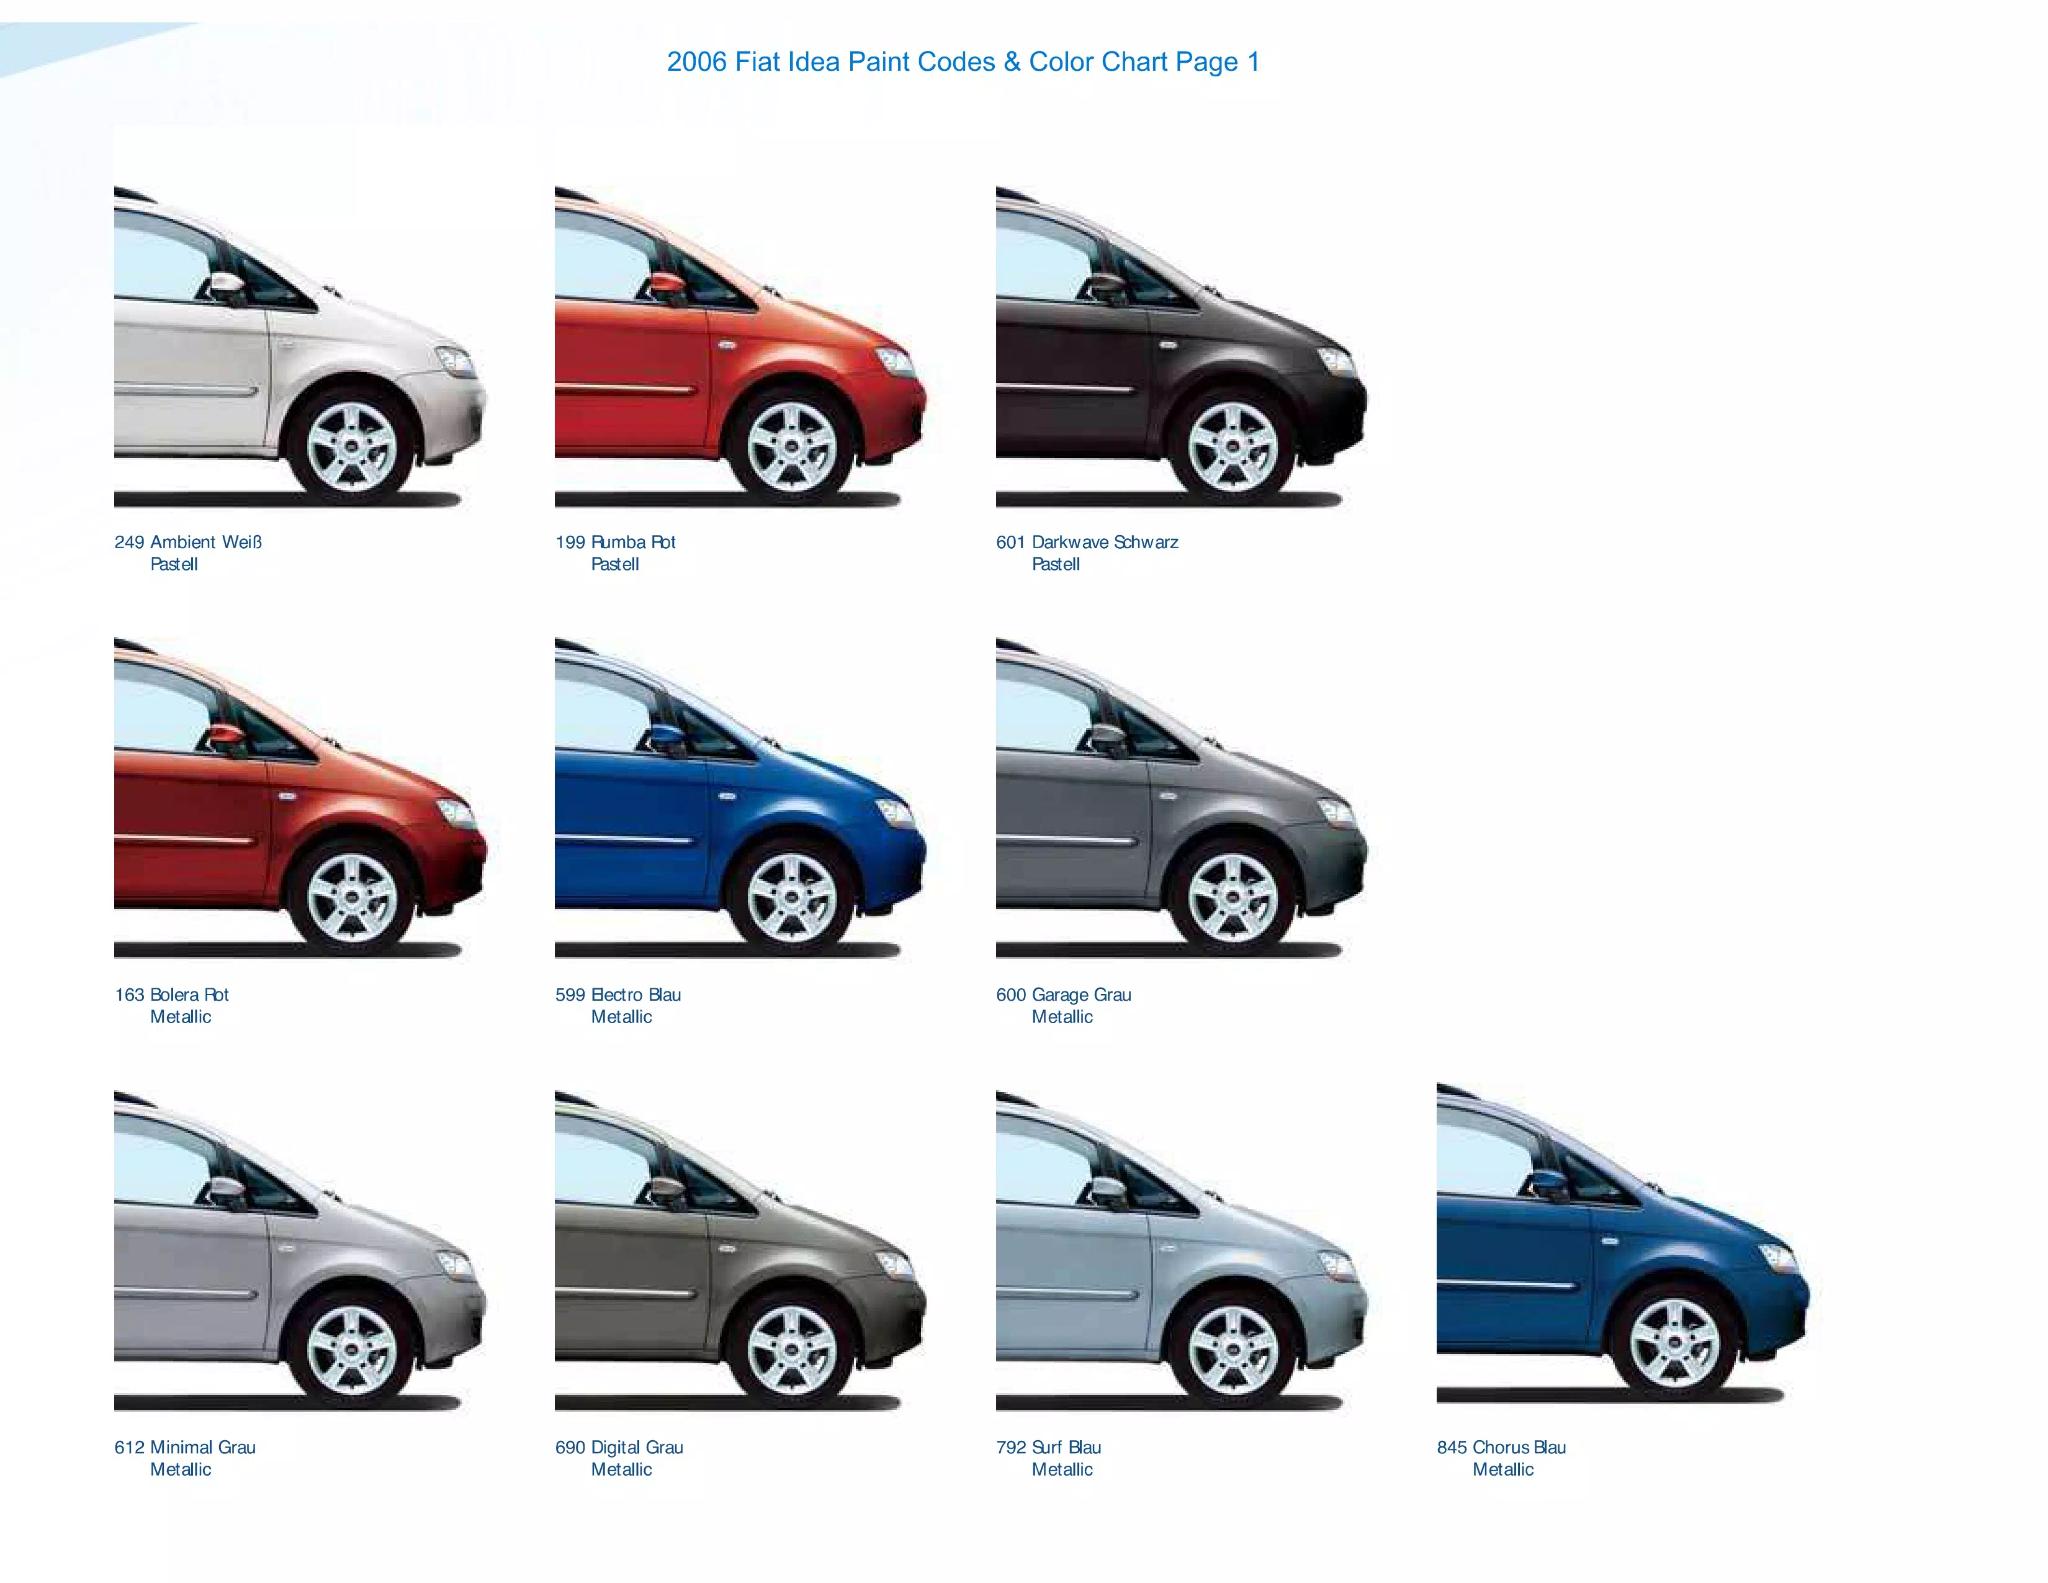 Vehicle Examples and color the 2006 Fiat model Idea came in.